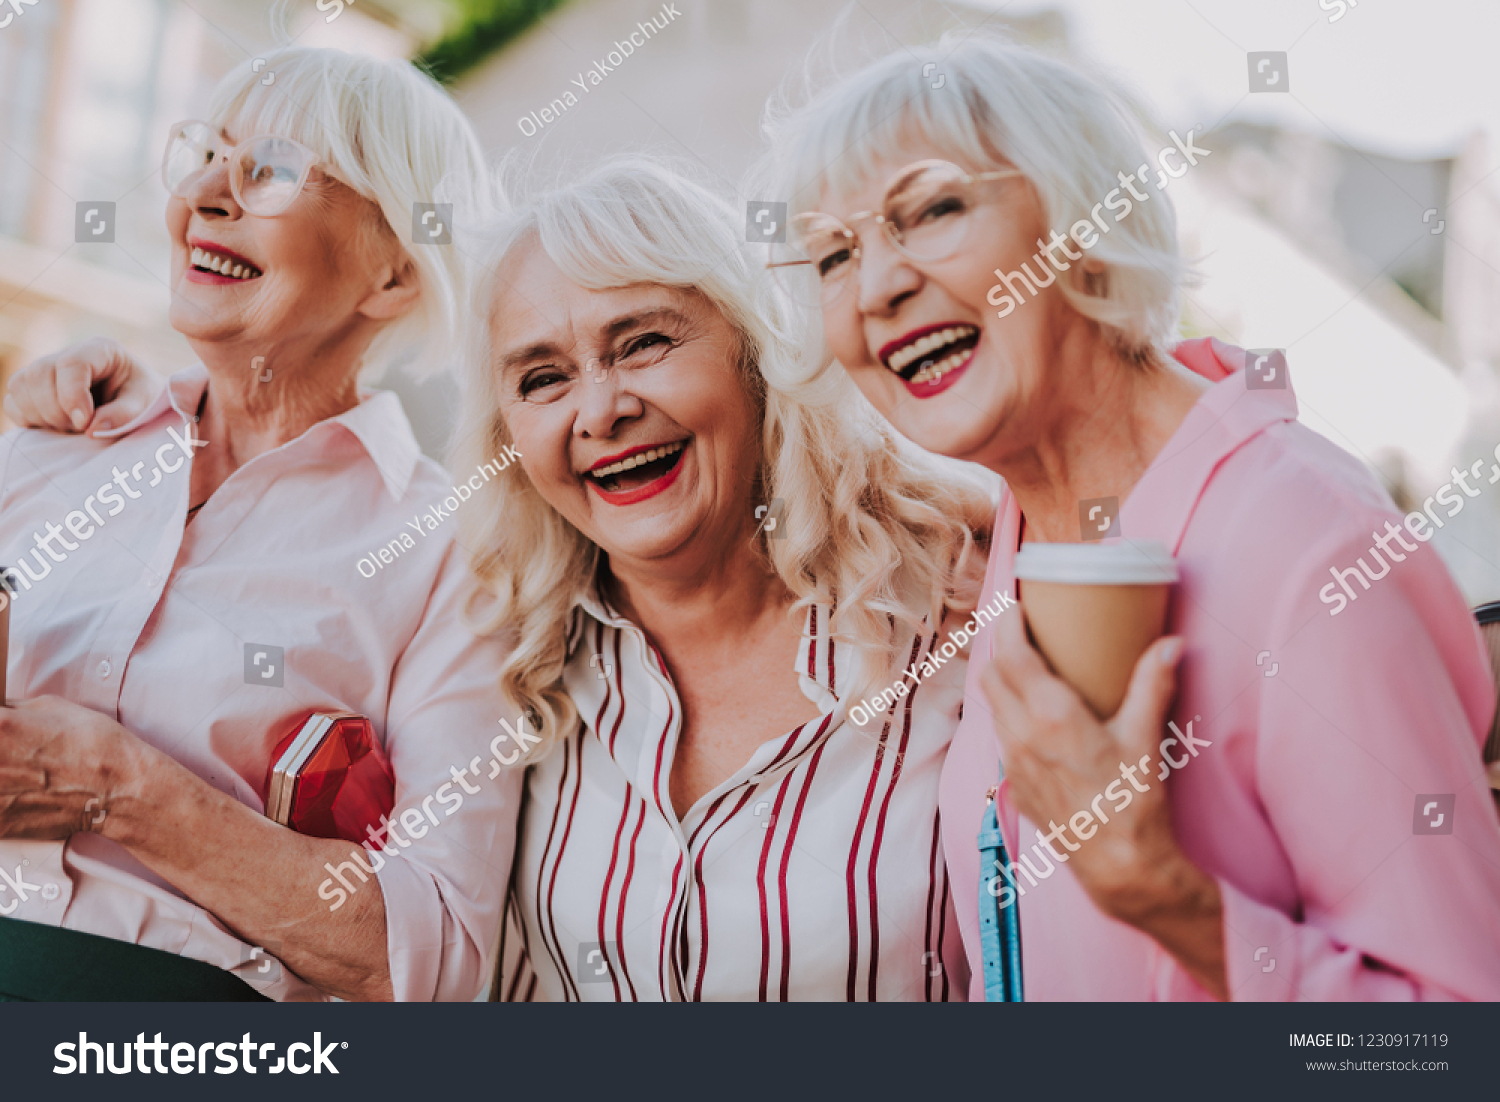 Waist up portrait of three positive older women joking and having fun together #1230917119